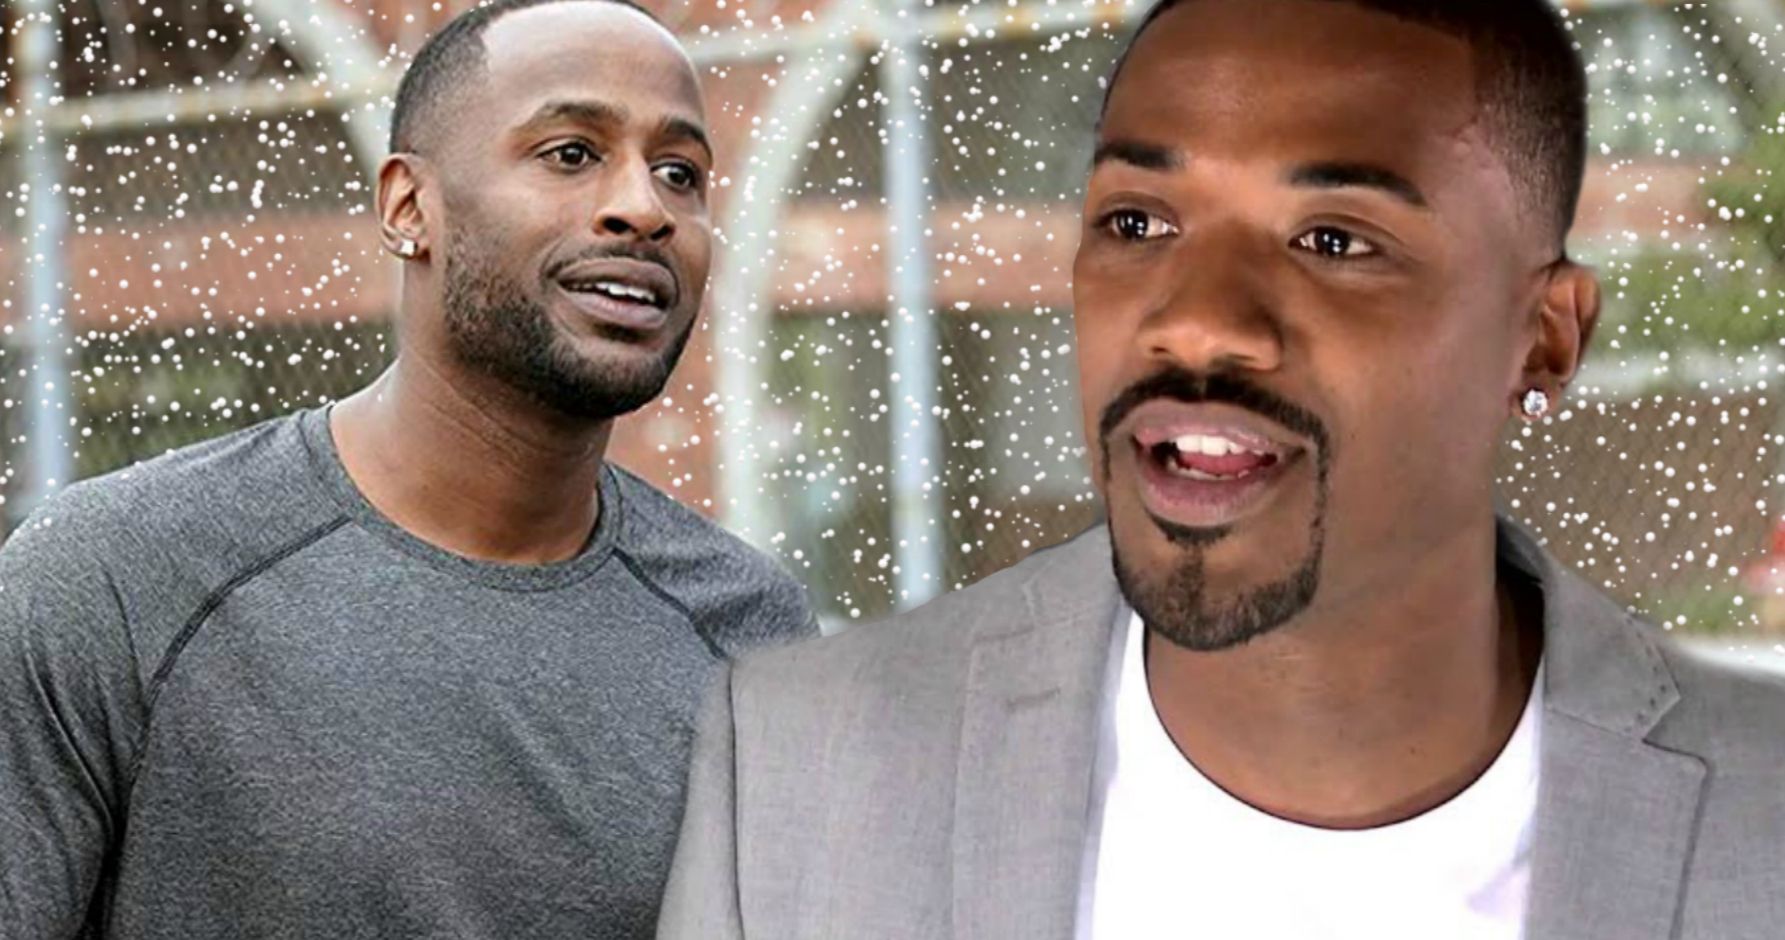 The App That Stole Christmas Teams Ray J & Jackie Long for ...